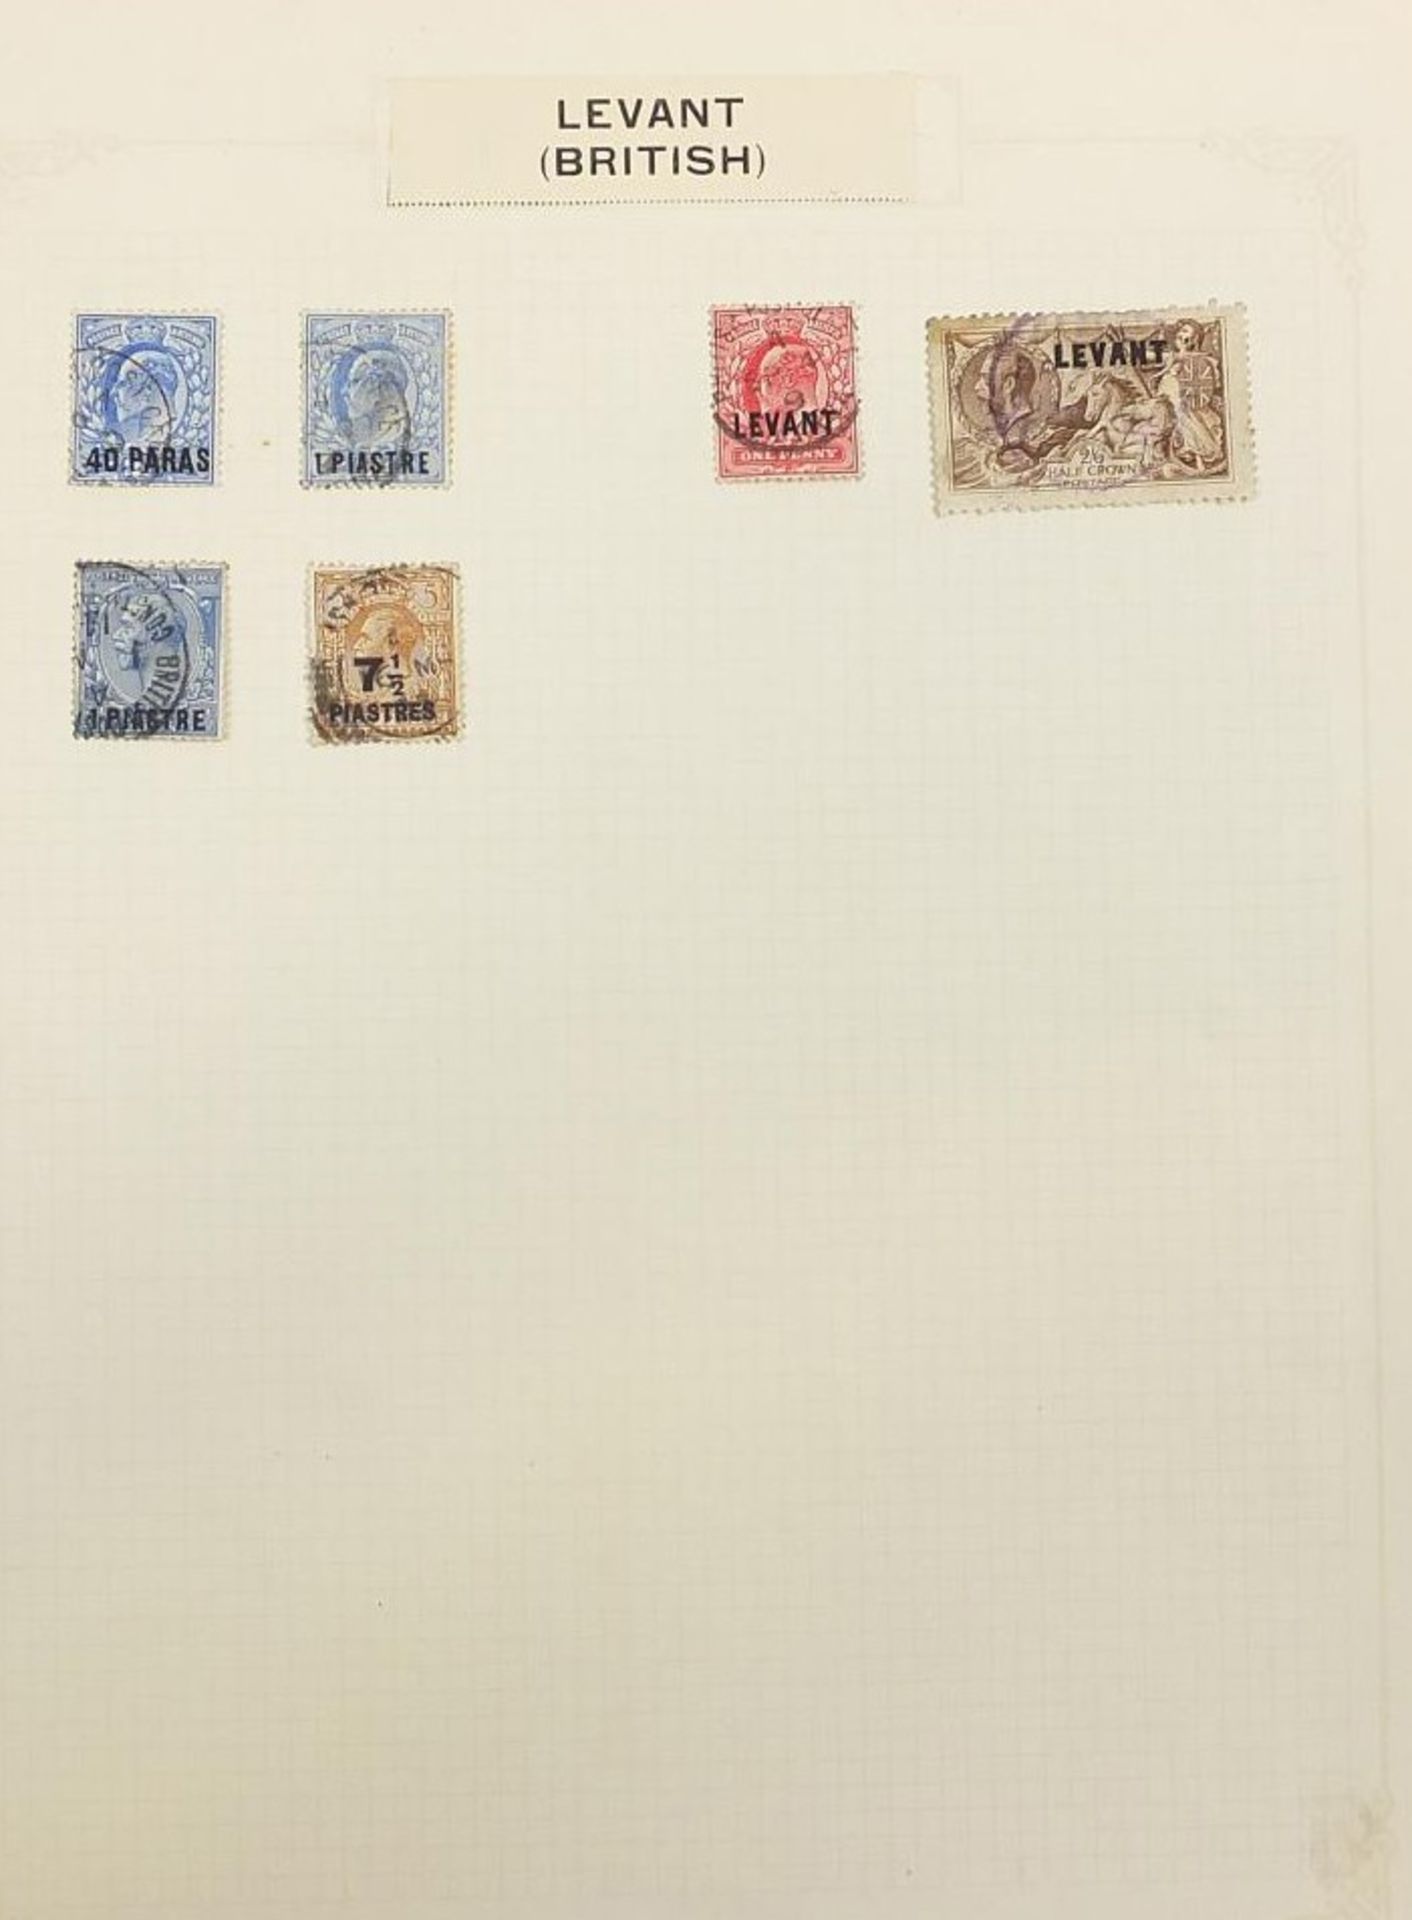 Commonwealth stamps Jamaica, Leeward Islands and British Levant arranged on several pages - Image 3 of 6